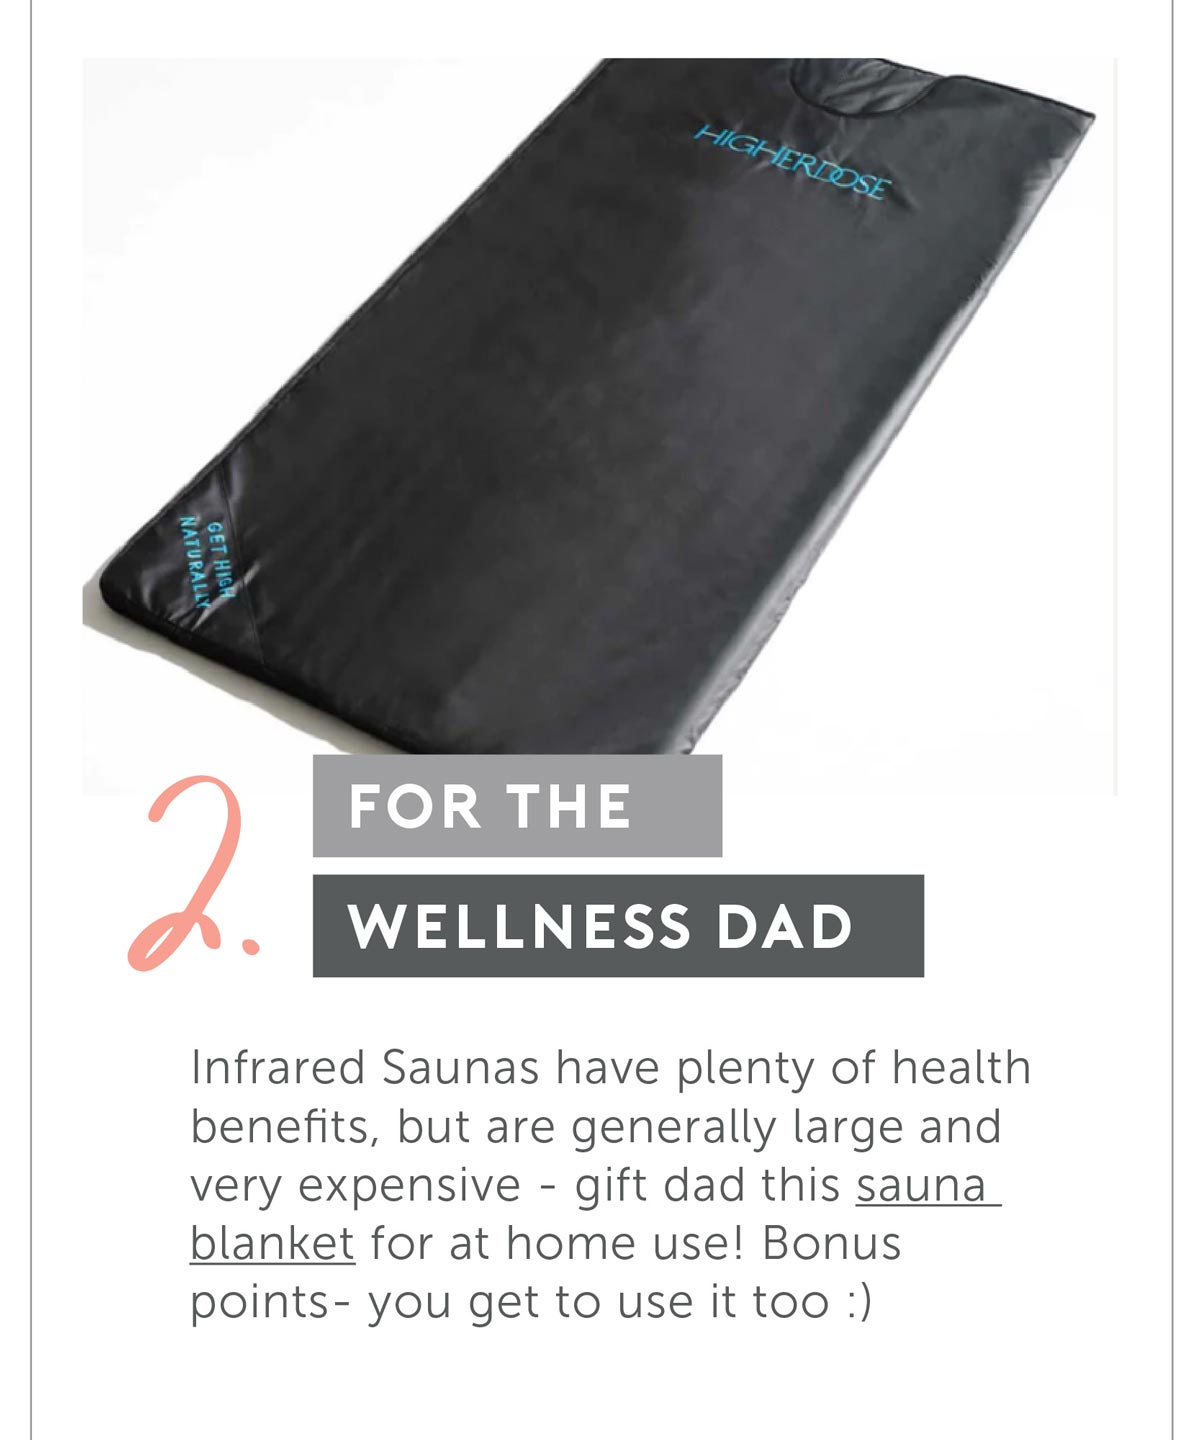 For The wellness Dad. Infrared Saunas have plenty of health benefits, but are generally large and very expensive- gift dad this sauna blanket for at home use! Bonus points- you get to use it too :)